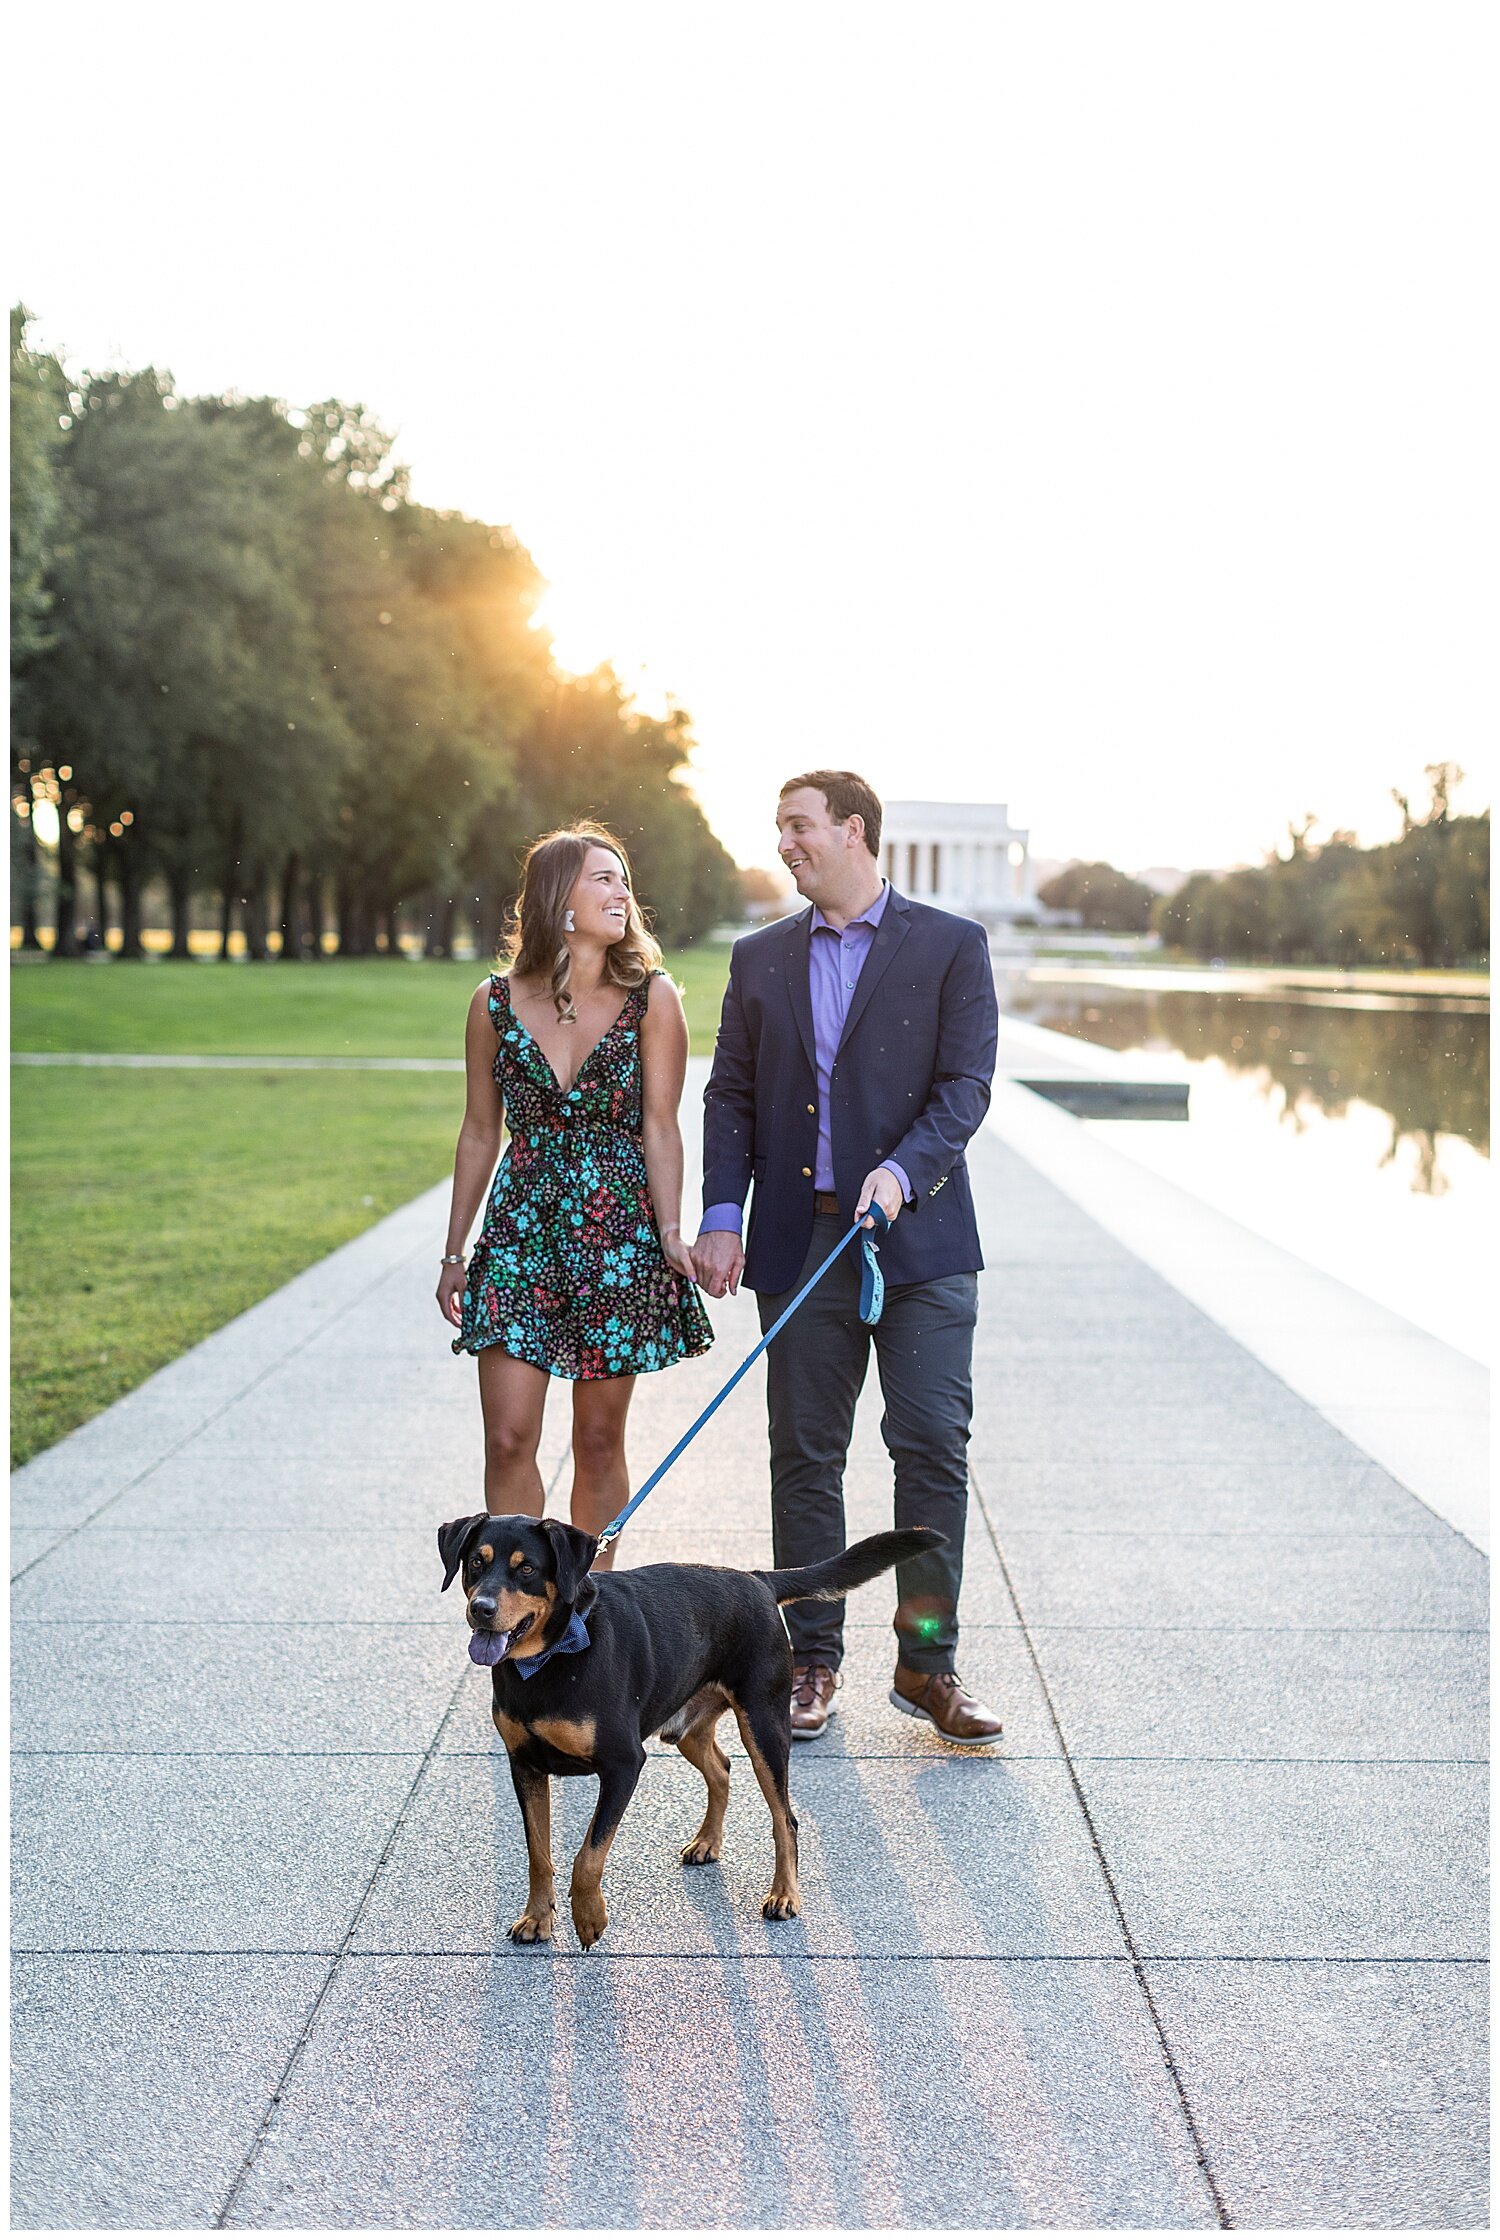 Haylie Chris National Mall Engagement Session 2020 Living Radiant Photography_0020.jpg